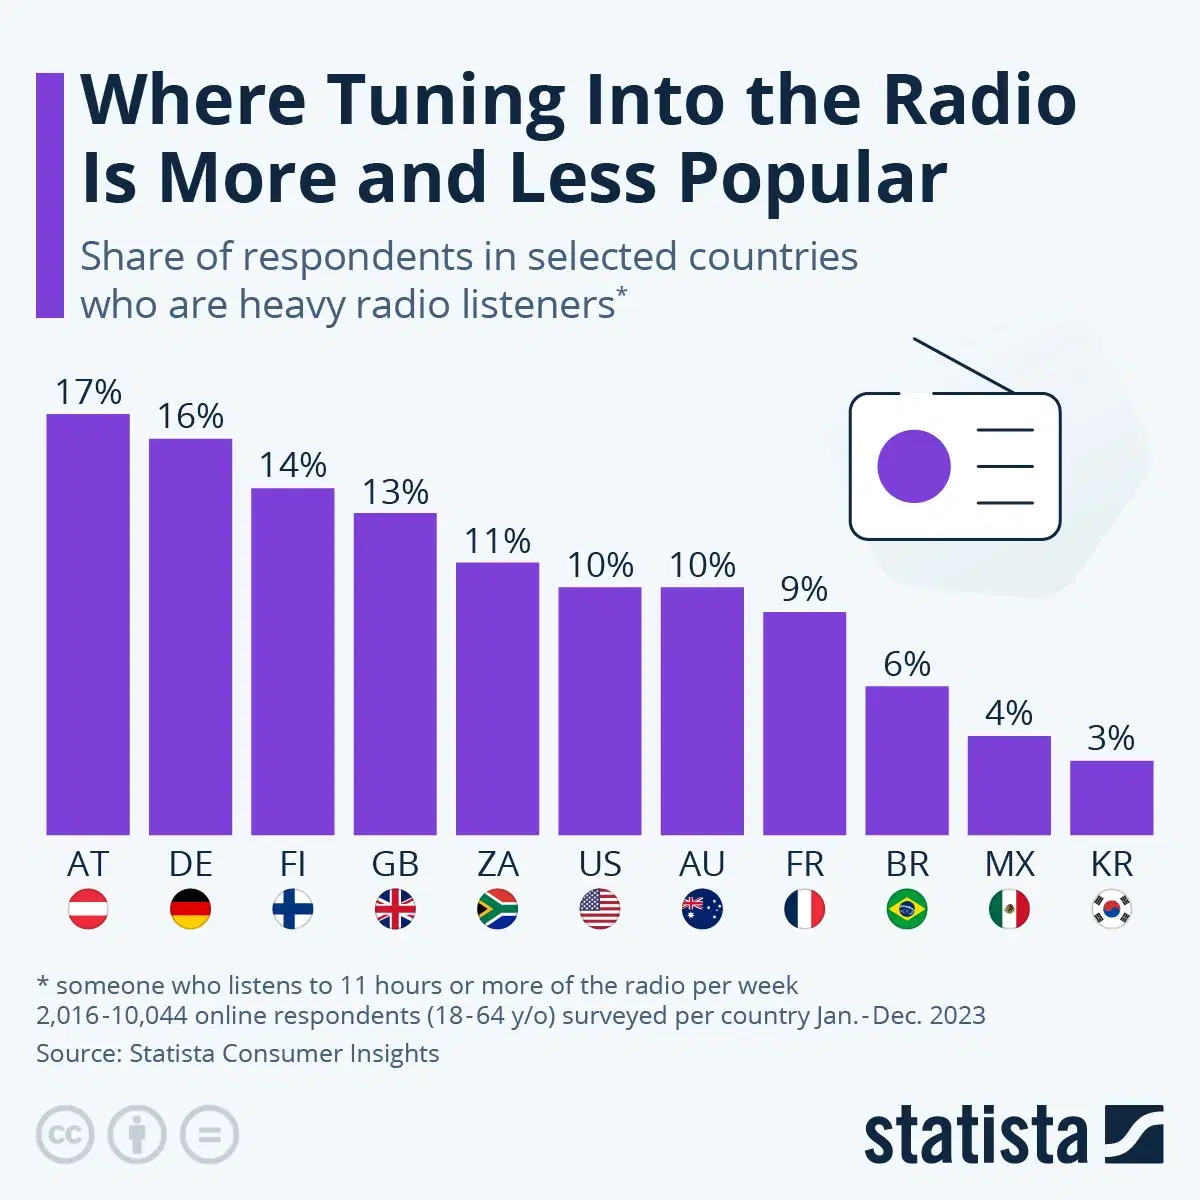 Where Tuning Into the Radio Is More and Less Popular